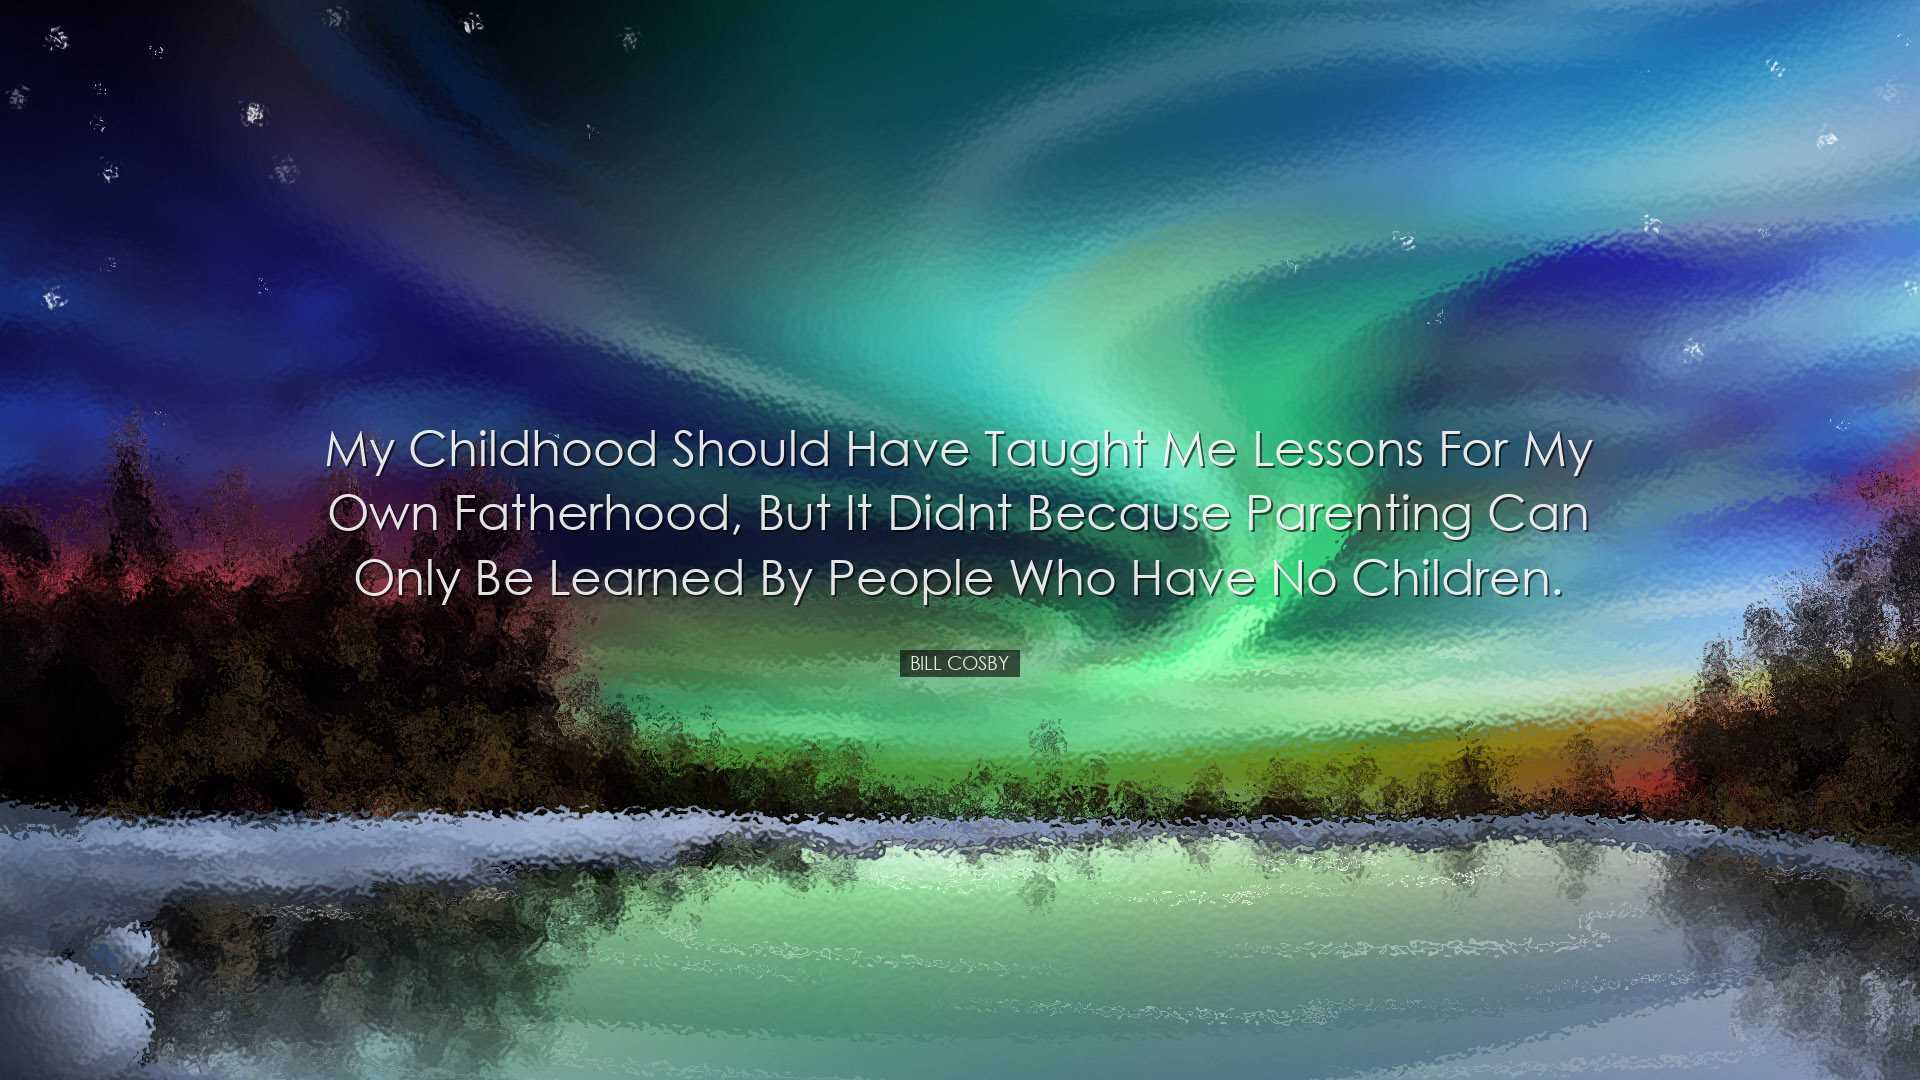 My childhood should have taught me lessons for my own fatherhood,